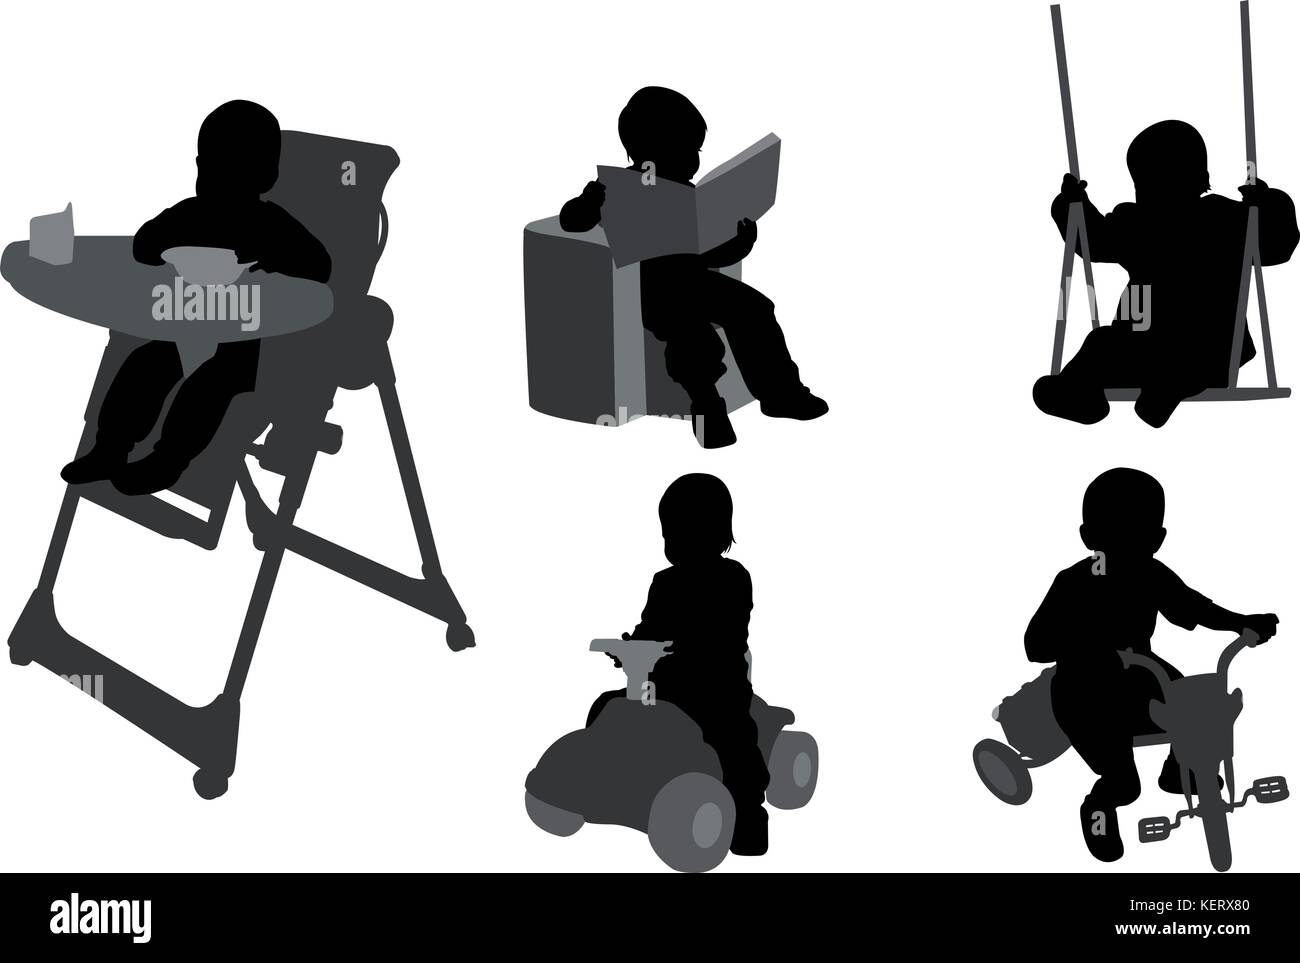 toddlers silhouettes 3 - vector Stock Vector